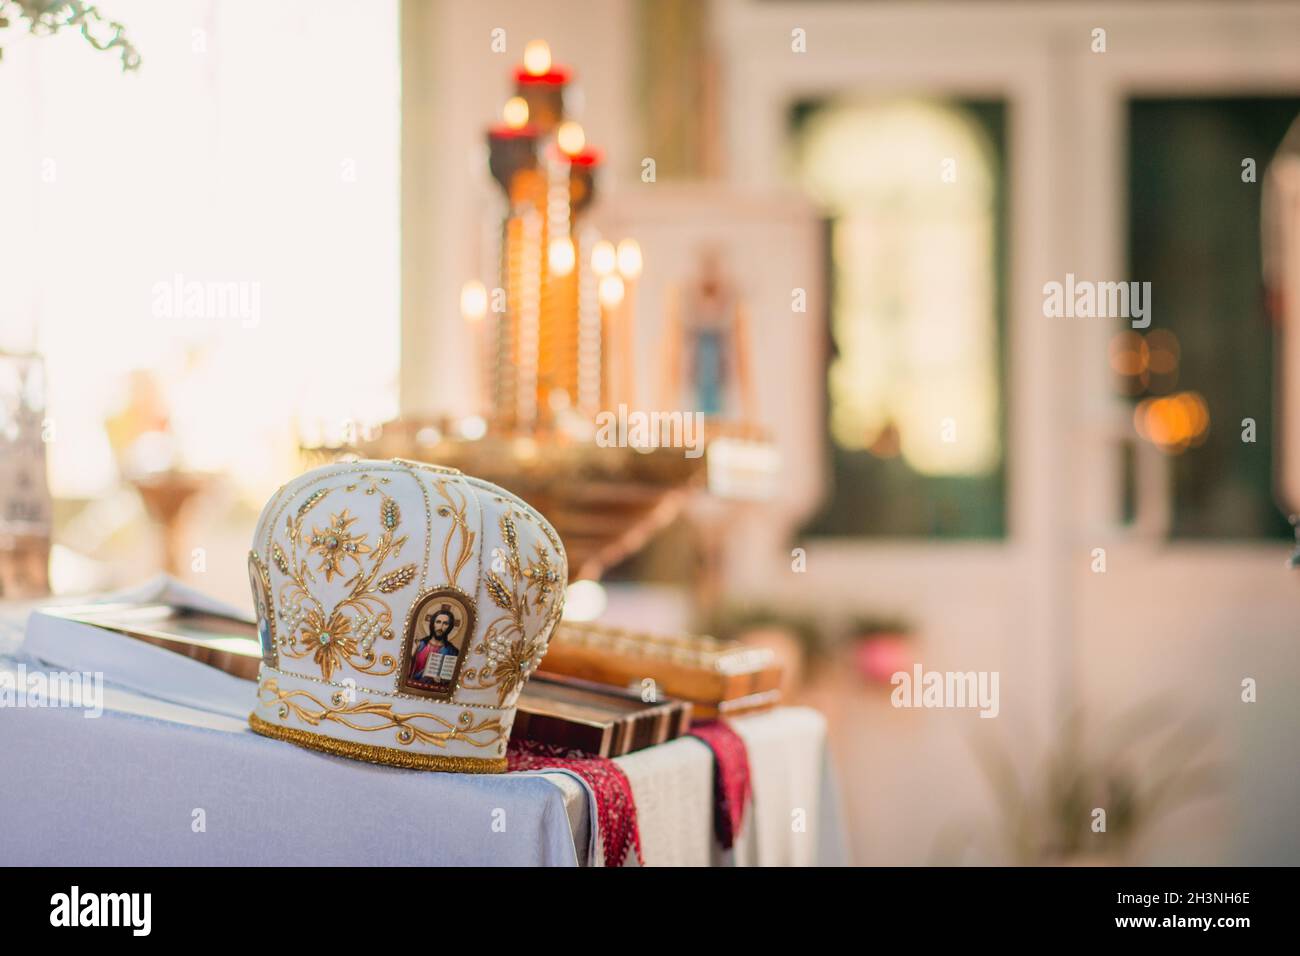 Priest's headdress on the table in the Orthodox Church with an icon Stock Photo